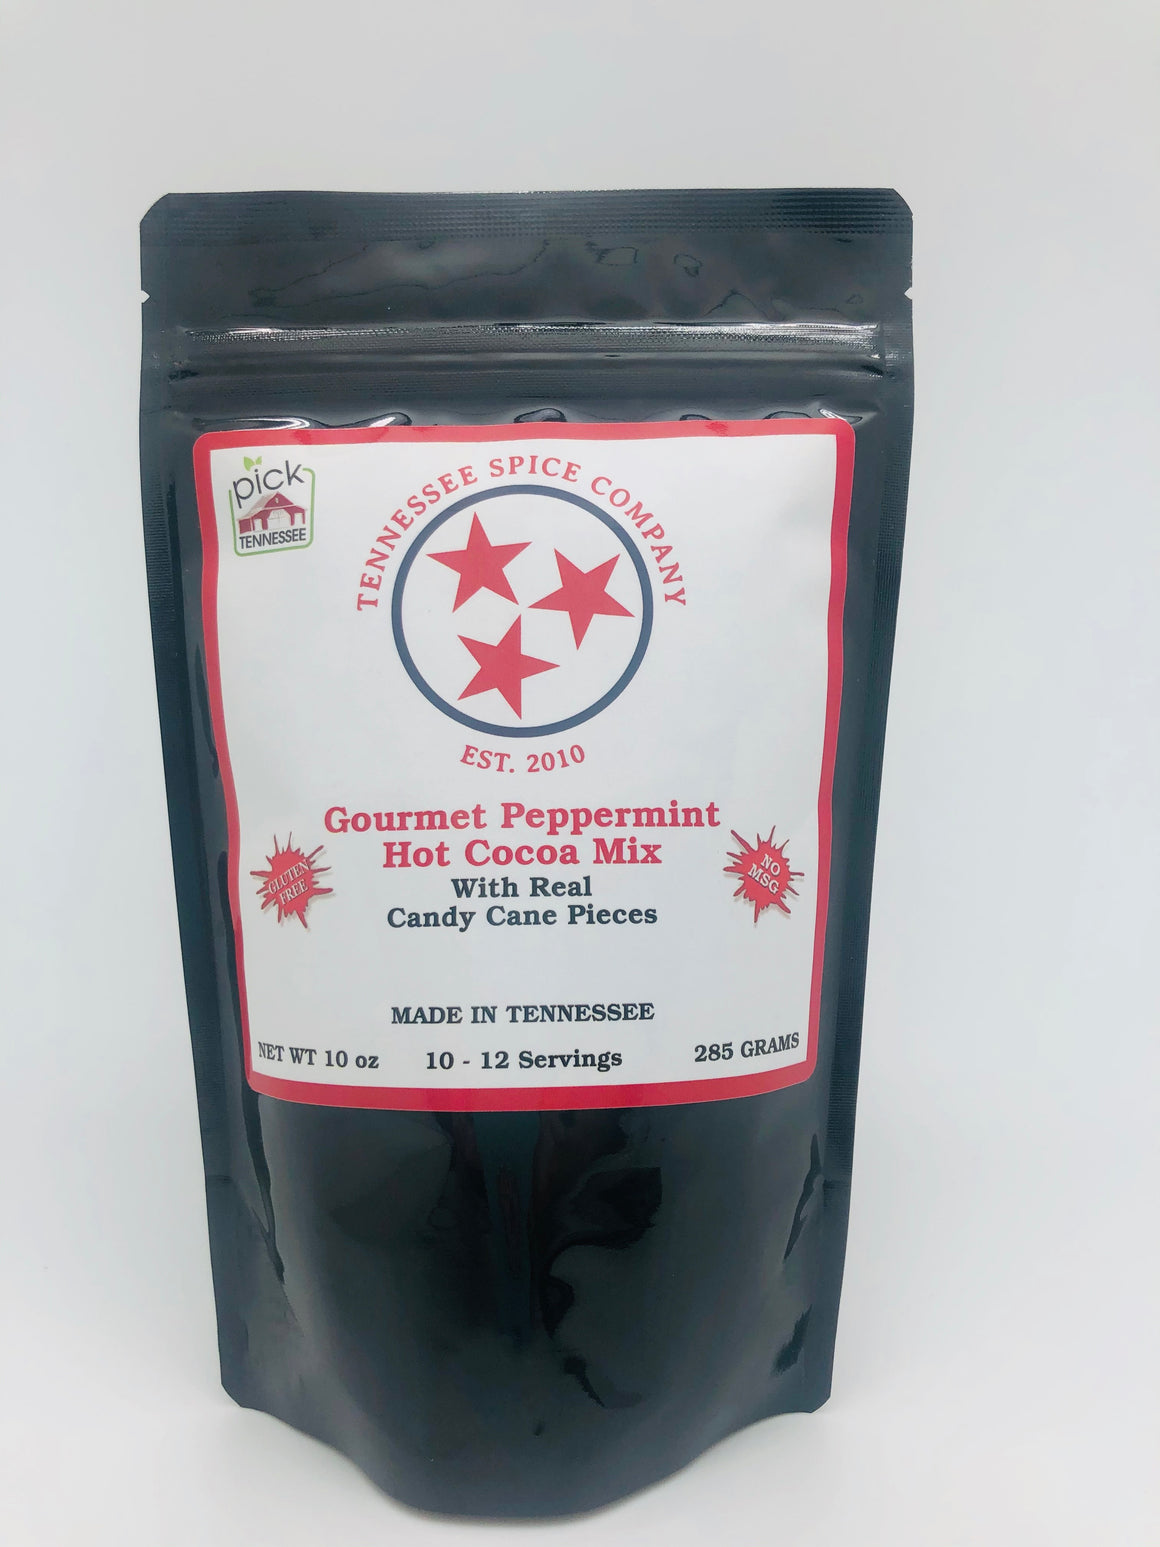 Gourmet Peppermint Hot Cocoa Mix - TN Spice